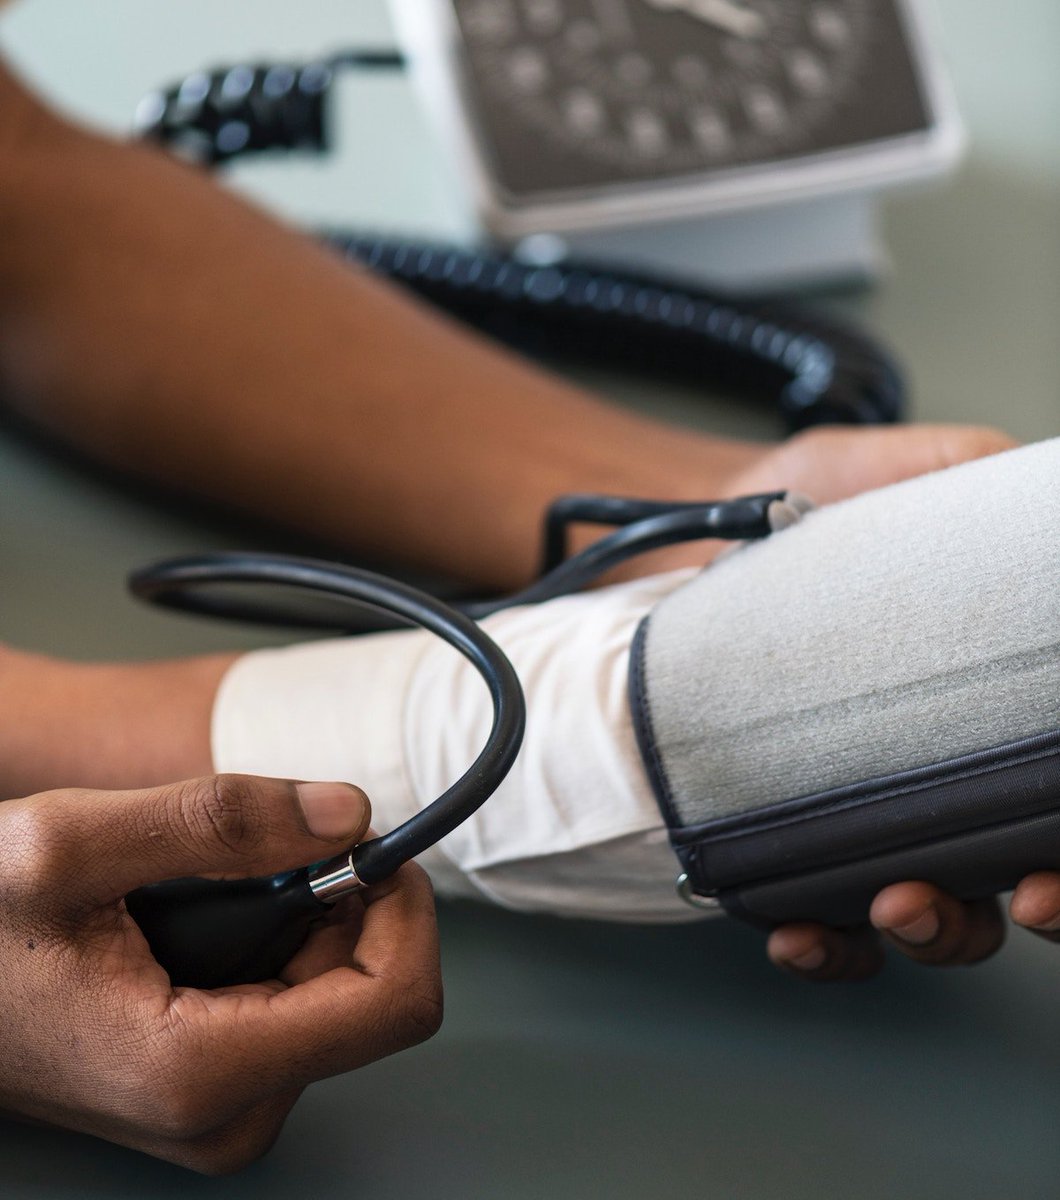 Can Your Water Softener Raise your Blood Pressure? behydrowise.com/2018/08/06/can…
#watersoftener #bloodpressure #healthandwellness #waterhealing #softwater #behydrowise